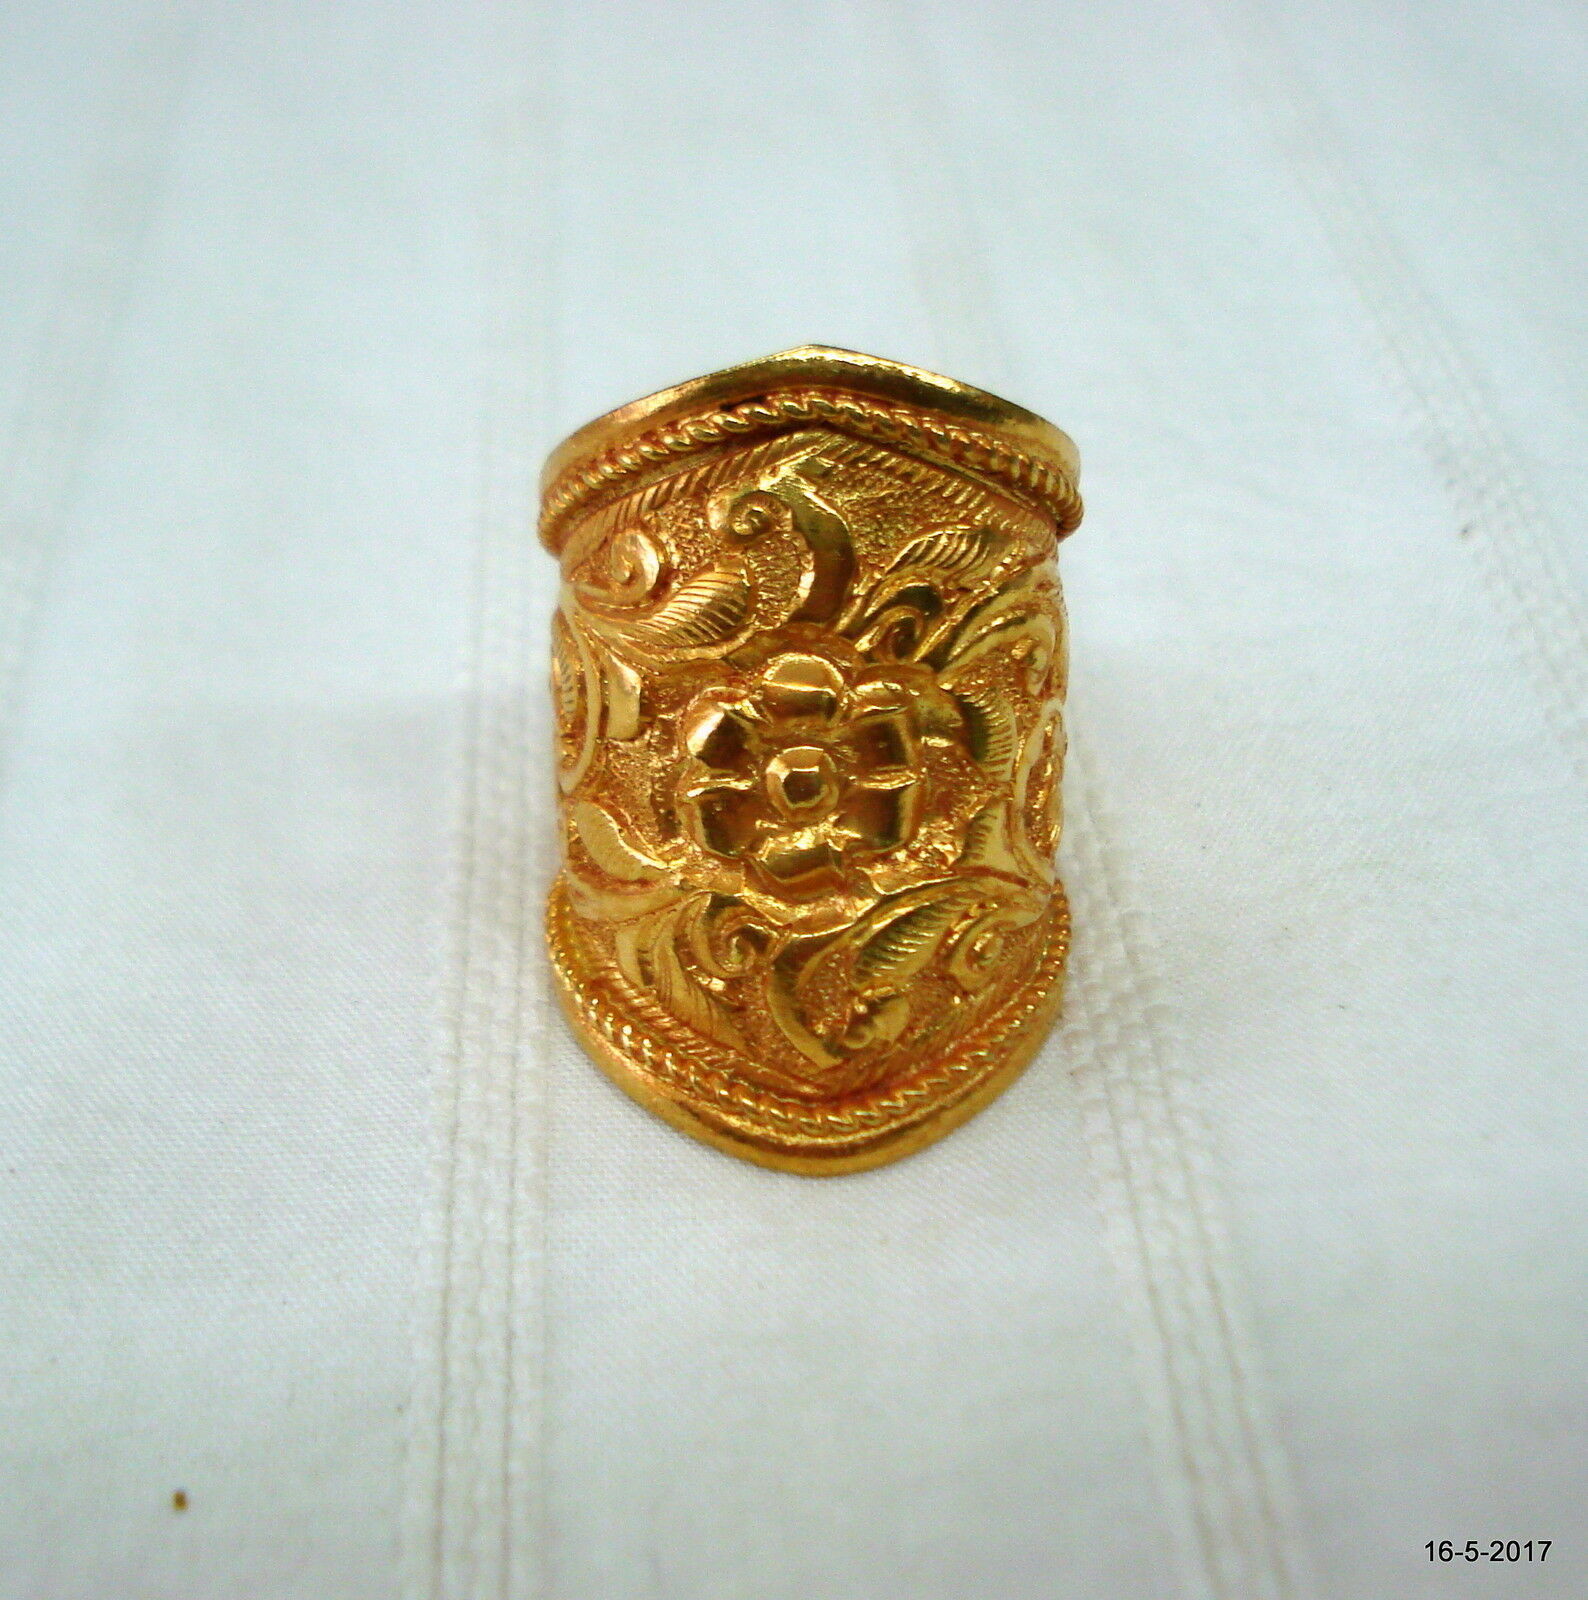 Primary image for ethnic sterling silver gold vermeil gold gilded ring cocktail ring